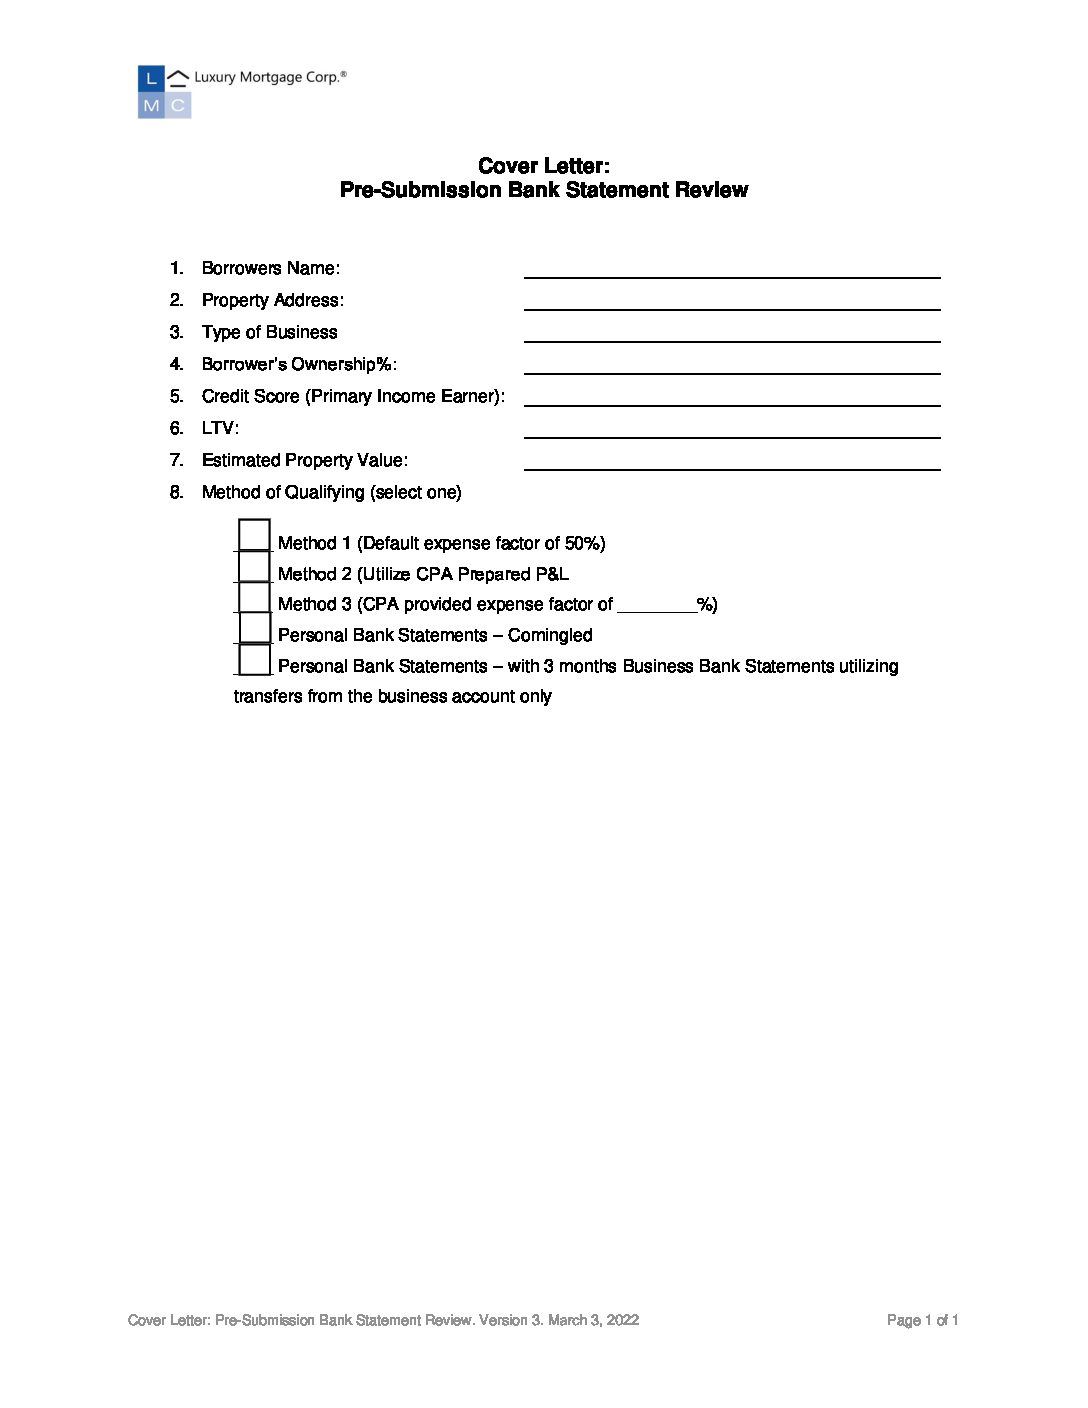 Cover Letter Pre-Submission Bank Statement Review